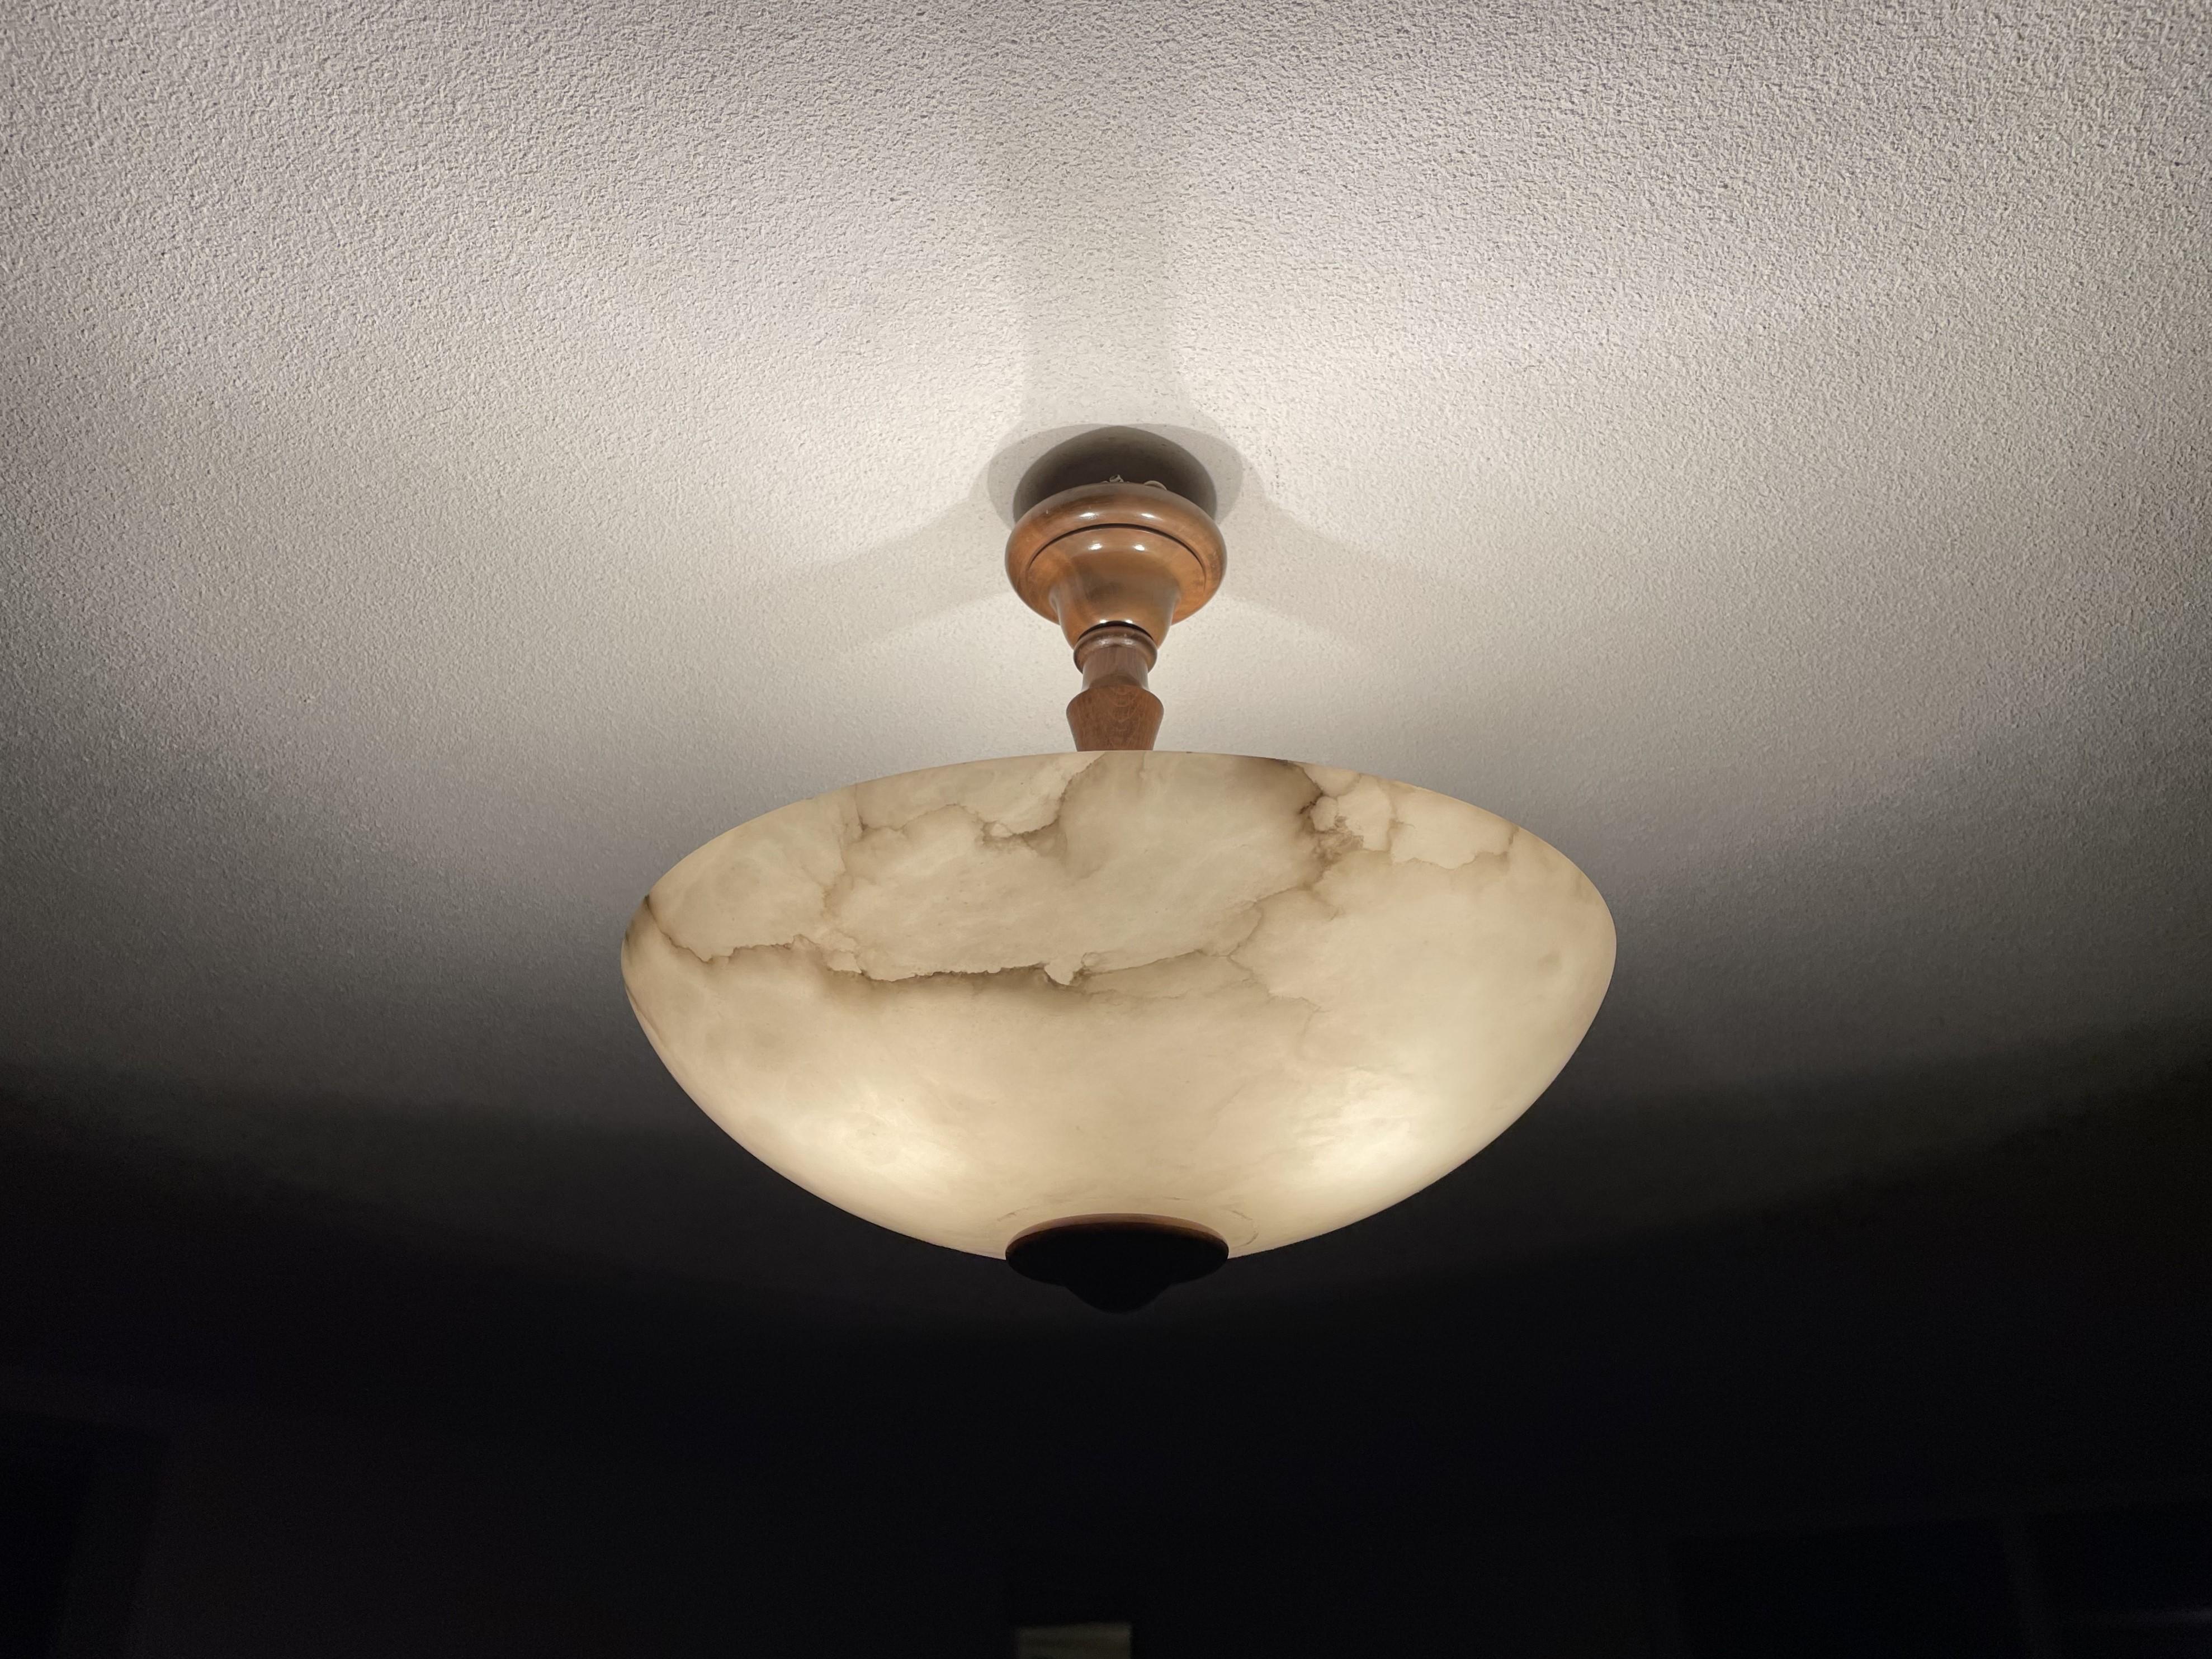 Timeless and very good condition alabaster light fixture.

The design and the perfect combination of materials make this mid-century made flush mount an absolute joy to own and look at. The near-mint condition of the alabaster shade with its perfect